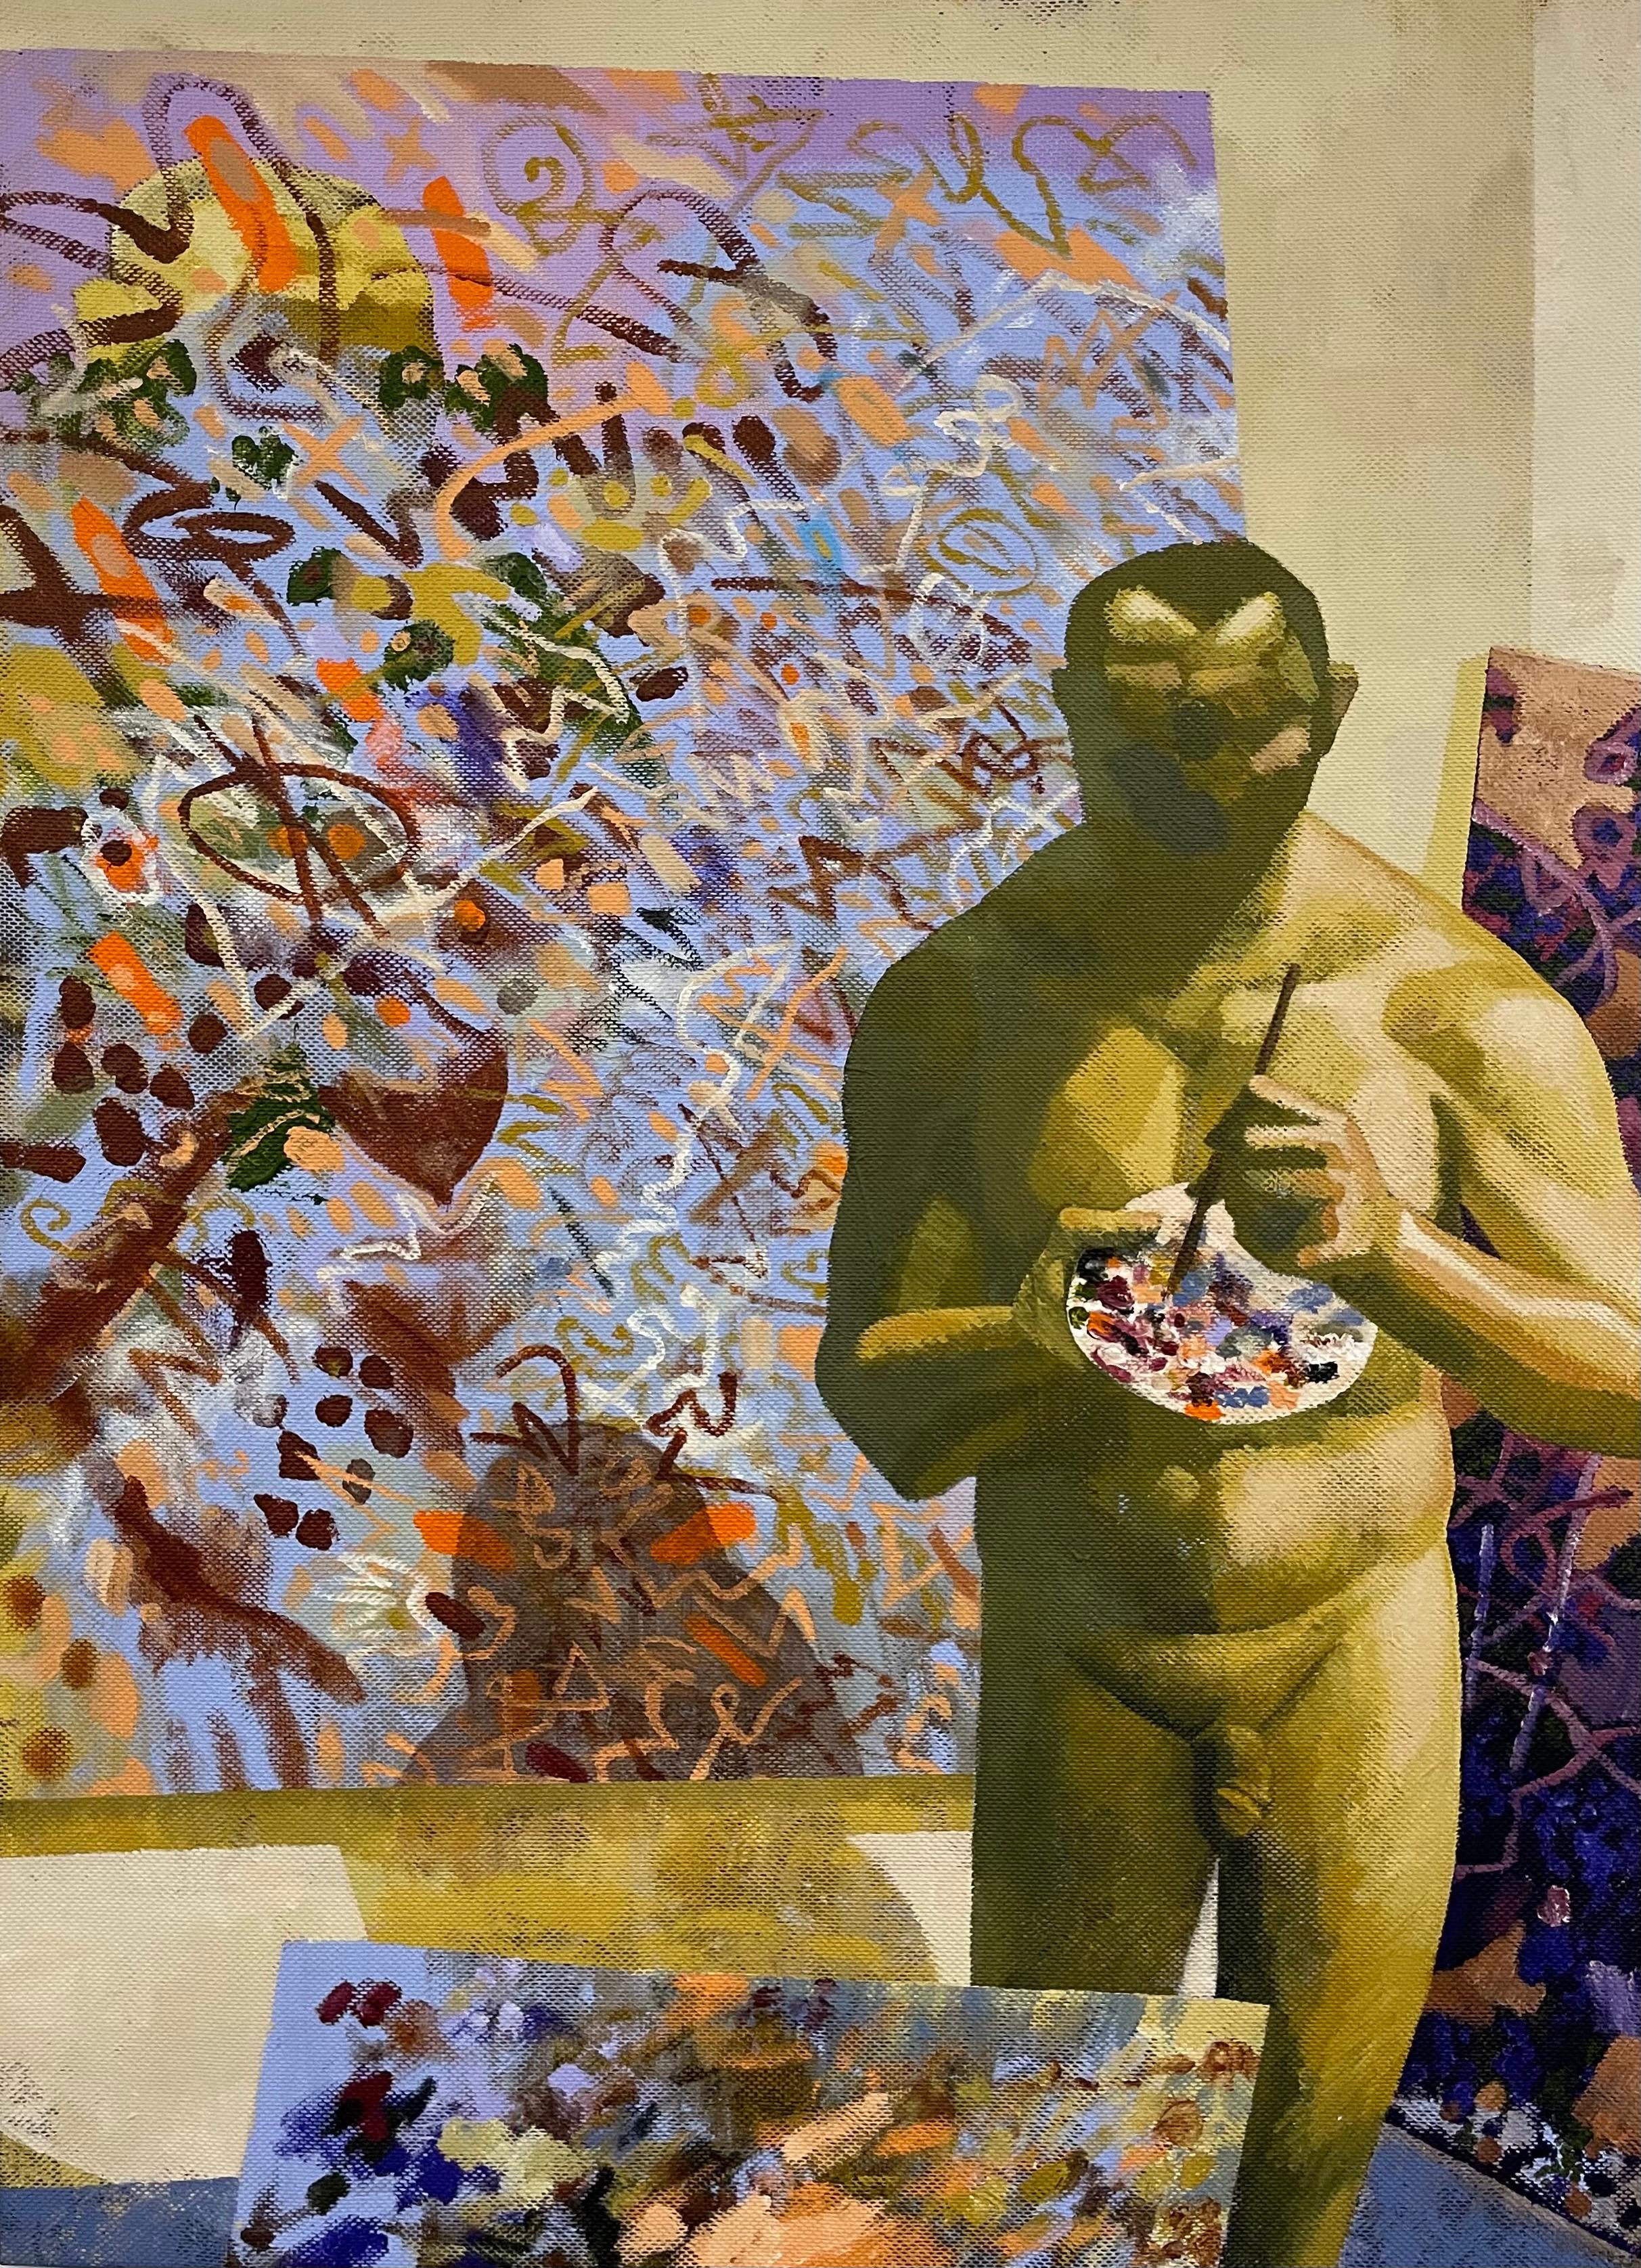 Le Chef d'oeuvre inconnu - 21st Century, Male, Nude, Contemporary, Yellow